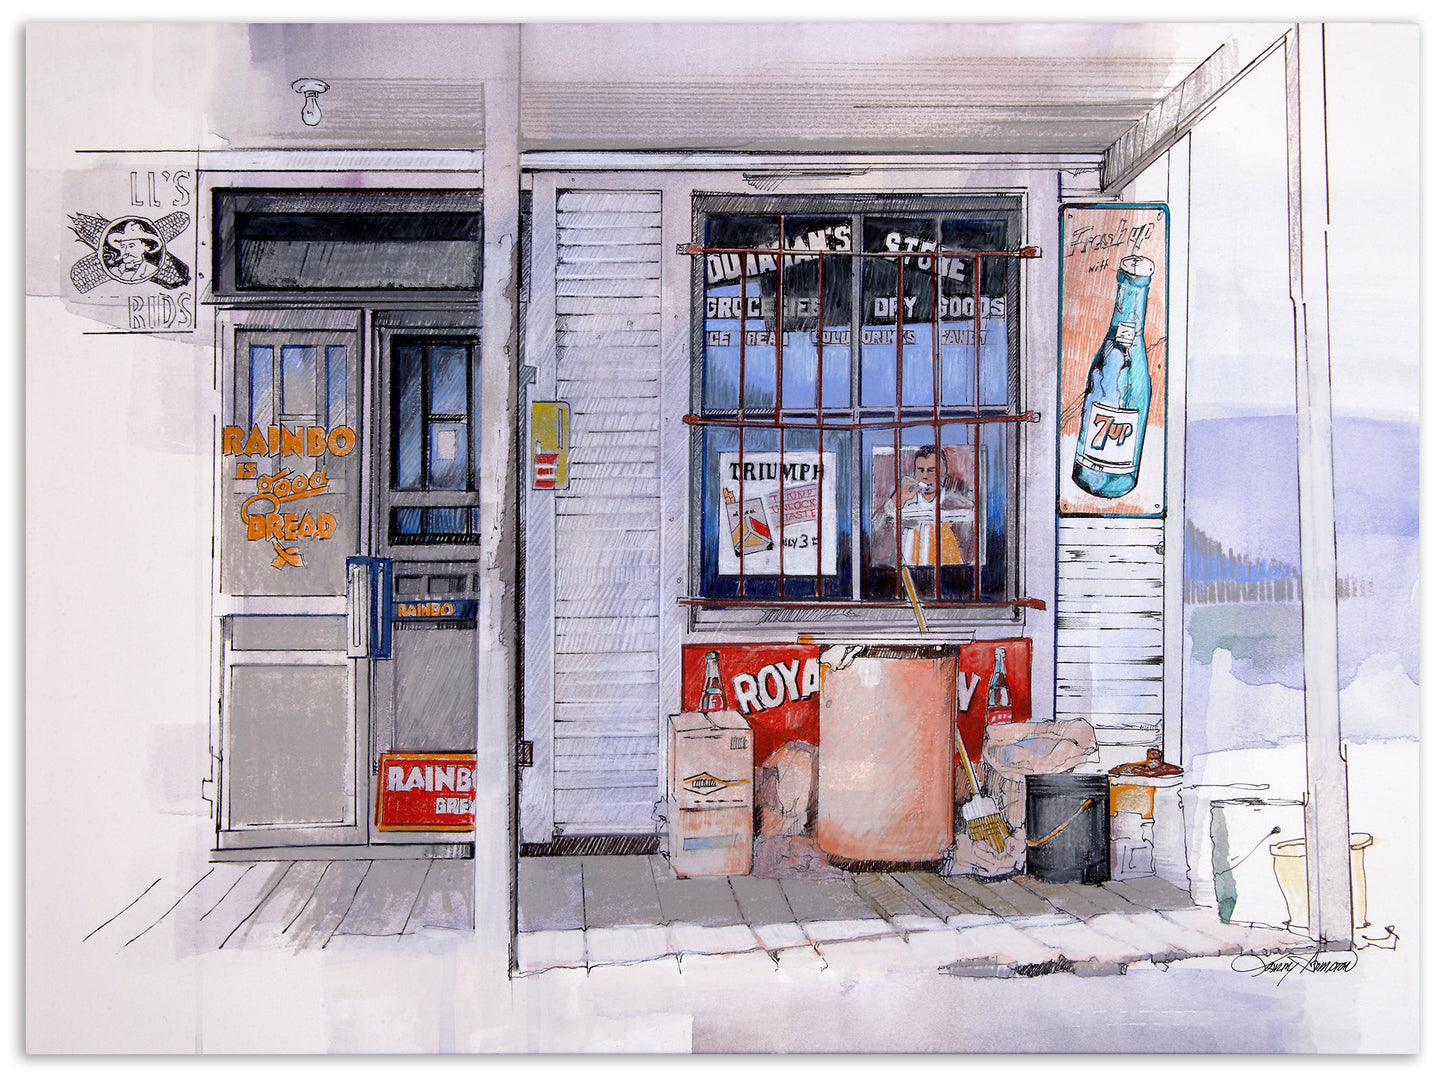 Limited Edition prints, mixed media watercolor and colored pencil art of an old store front. This store front porch scene has nostalgic signs displayed.